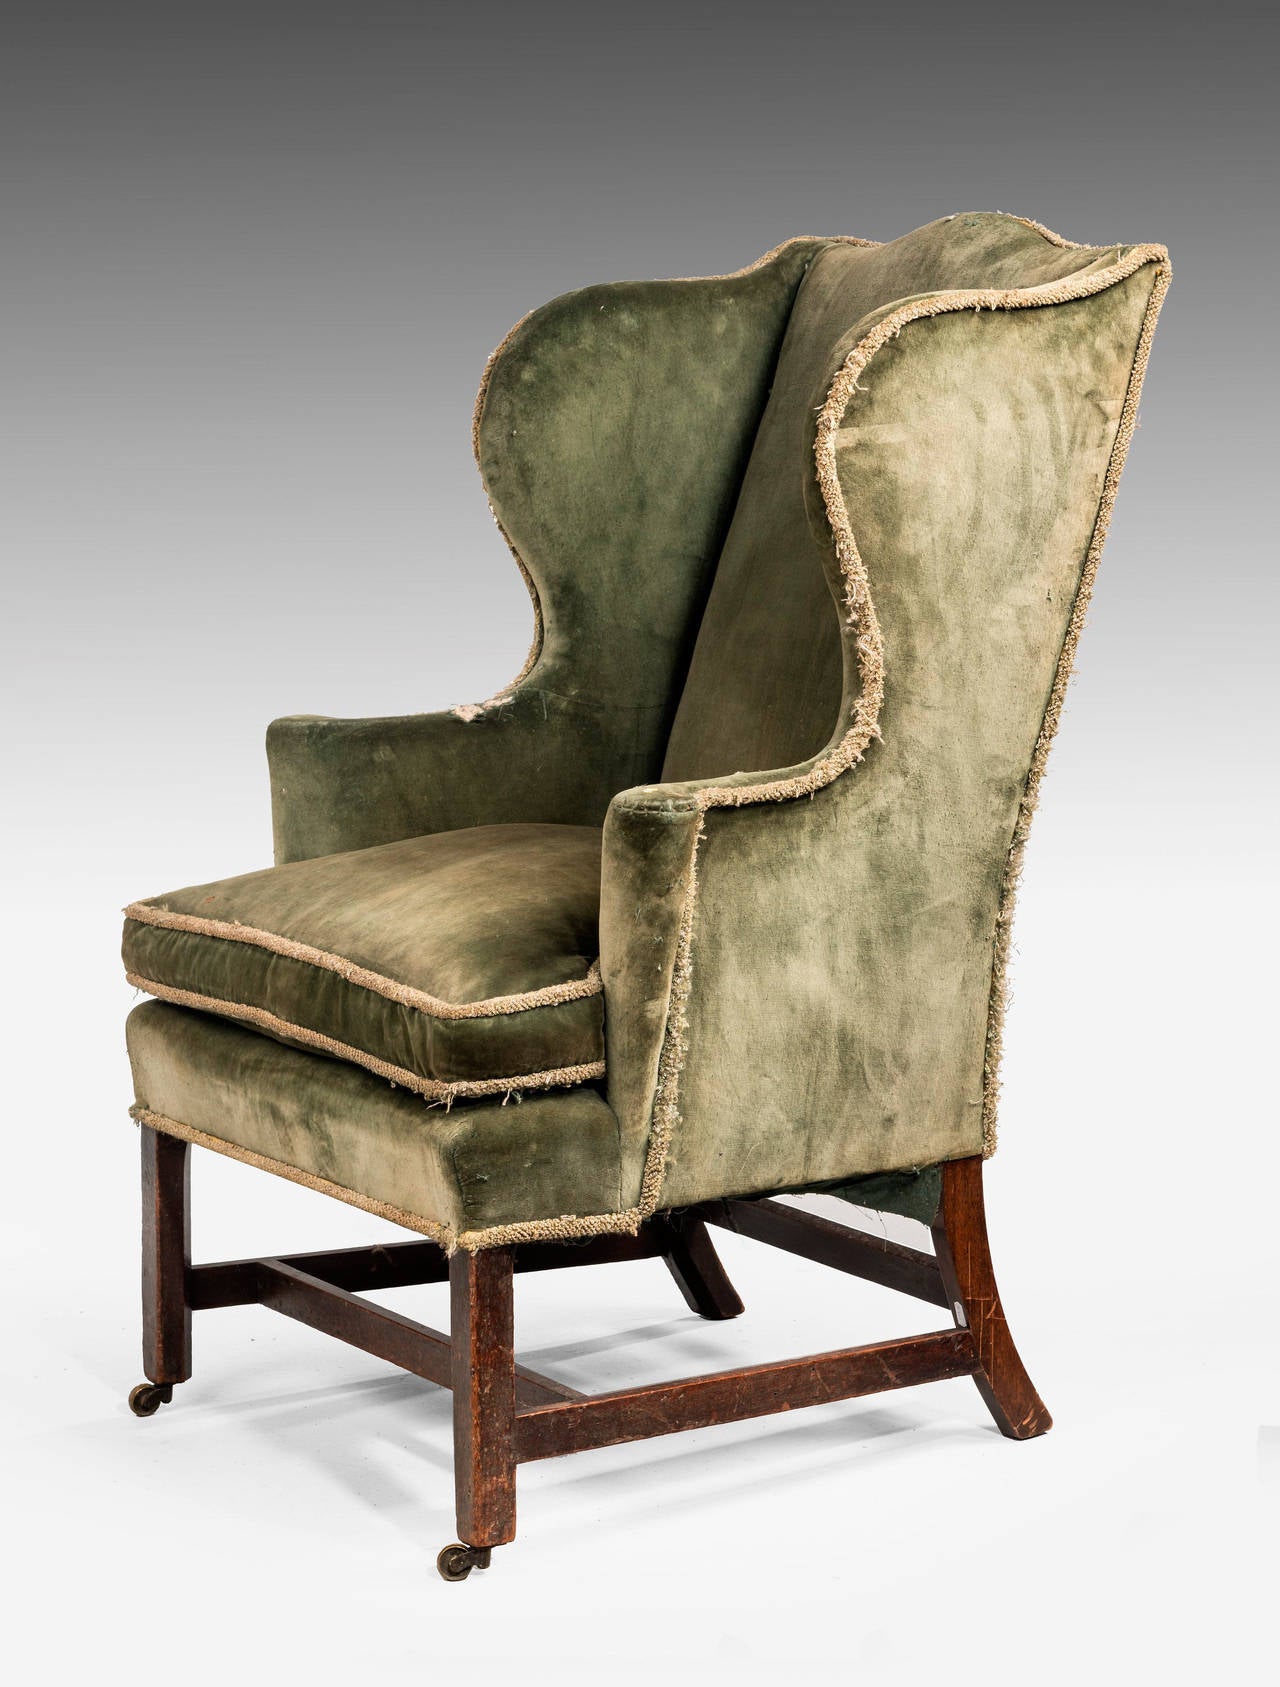 A Chippendale period mahogany framed Wing Chair. With square shaped supports joined with cross stretchers, slightly flared arms. Now requiring re upholstery. 

An 18th or 19th century wing chair is an easy chair or club chair with 